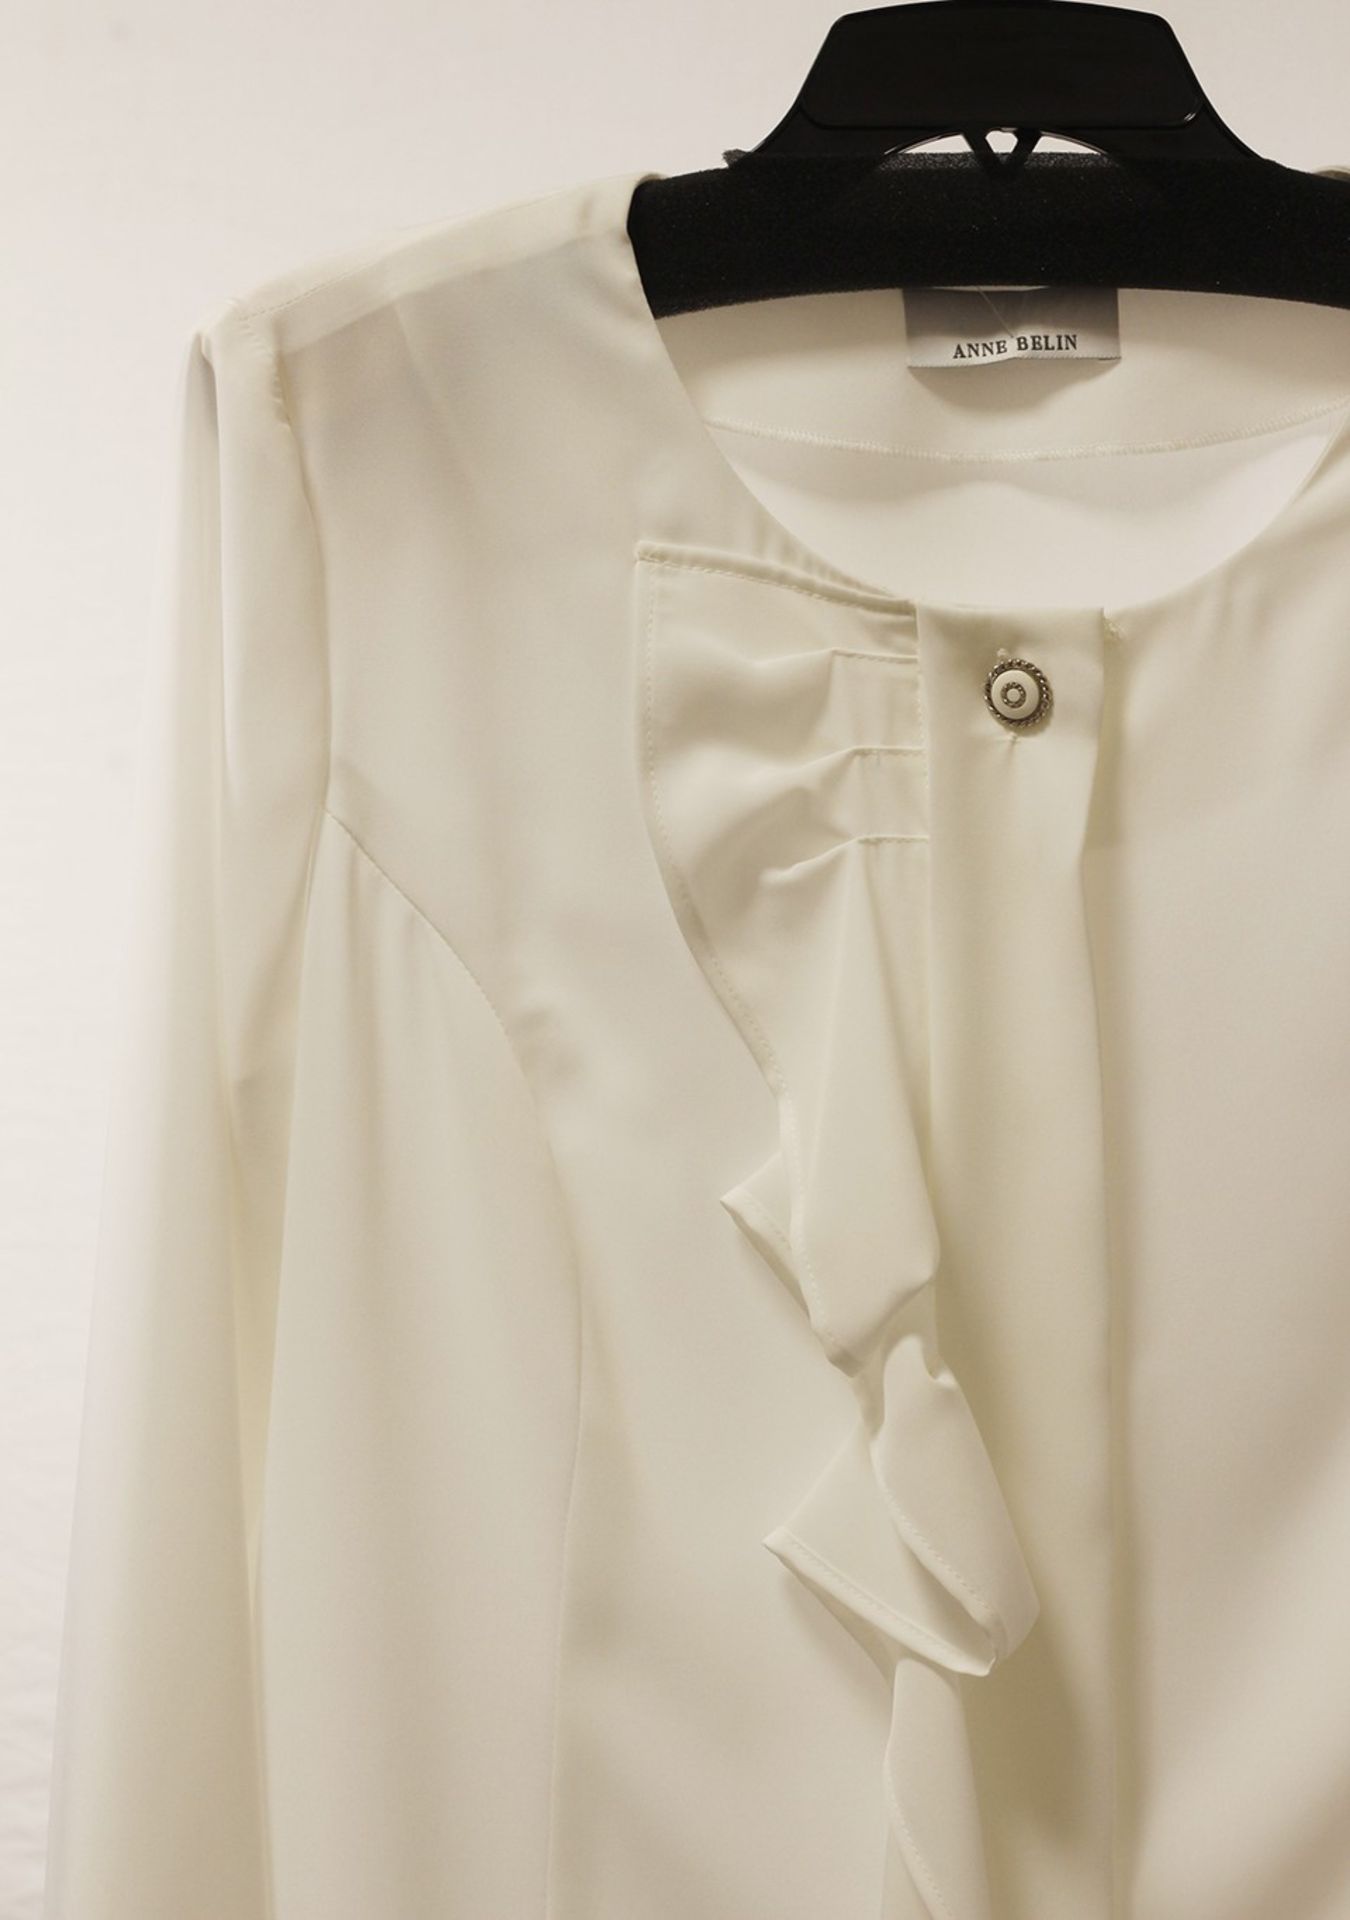 1 x Anne Belin White Shirt - Size: 18 - Material: 100% Polyester - From a High End Clothing Boutique - Image 9 of 9